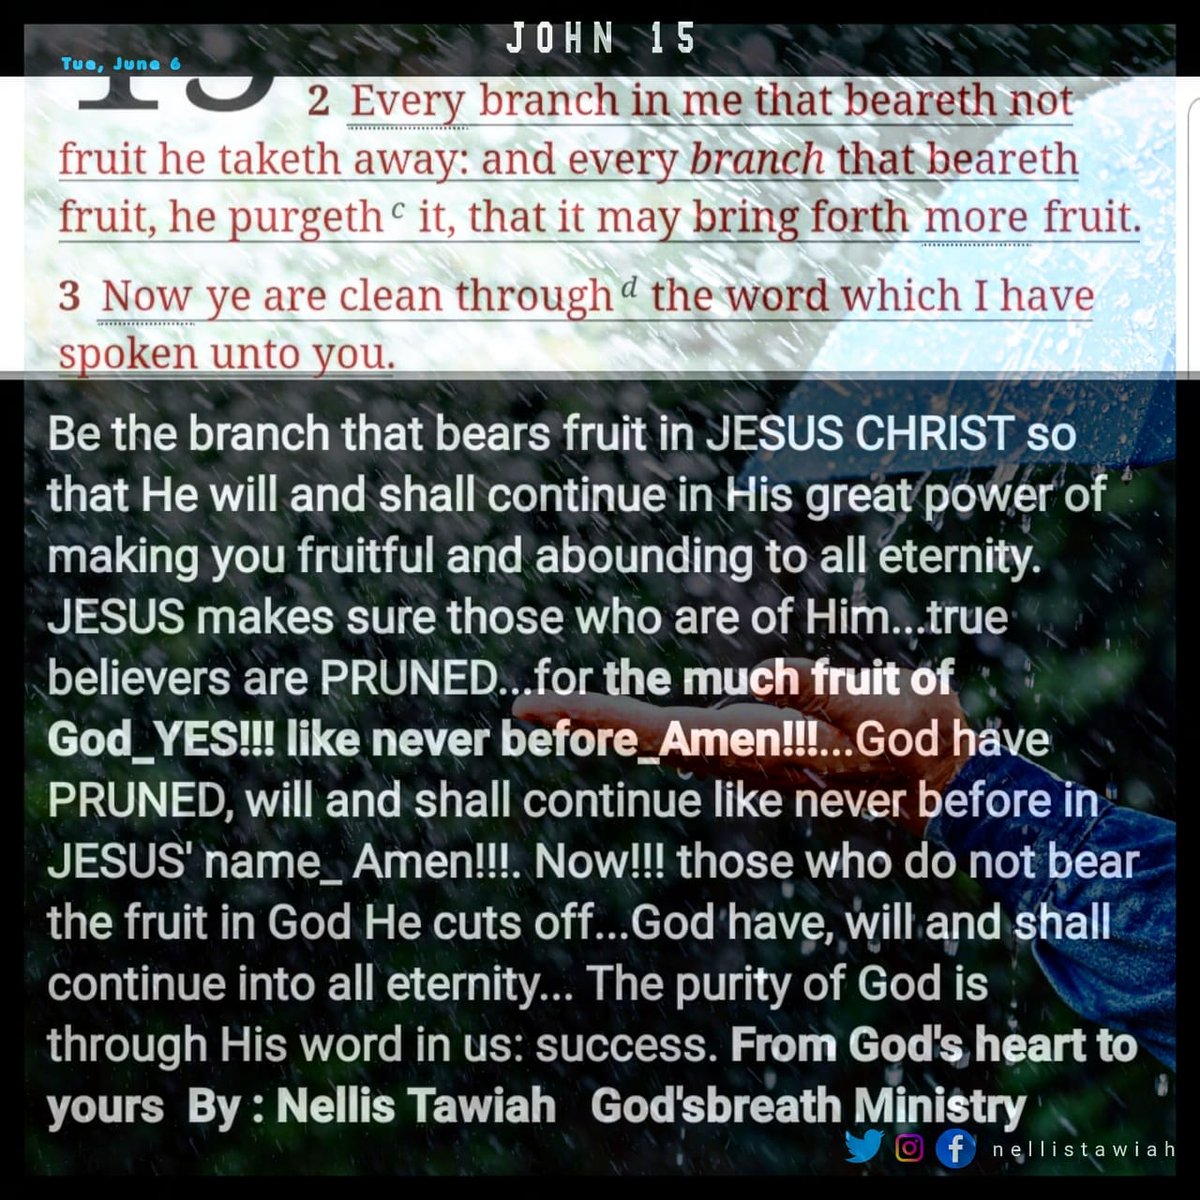 *The much fruit of God_YES!!! like never before_Amen!!!* 

#Graceatwork #scripture #christian #dailyword #dailybreath #thelight #theblessing #thefreedom #thekingdom #everywhere #muchfruit